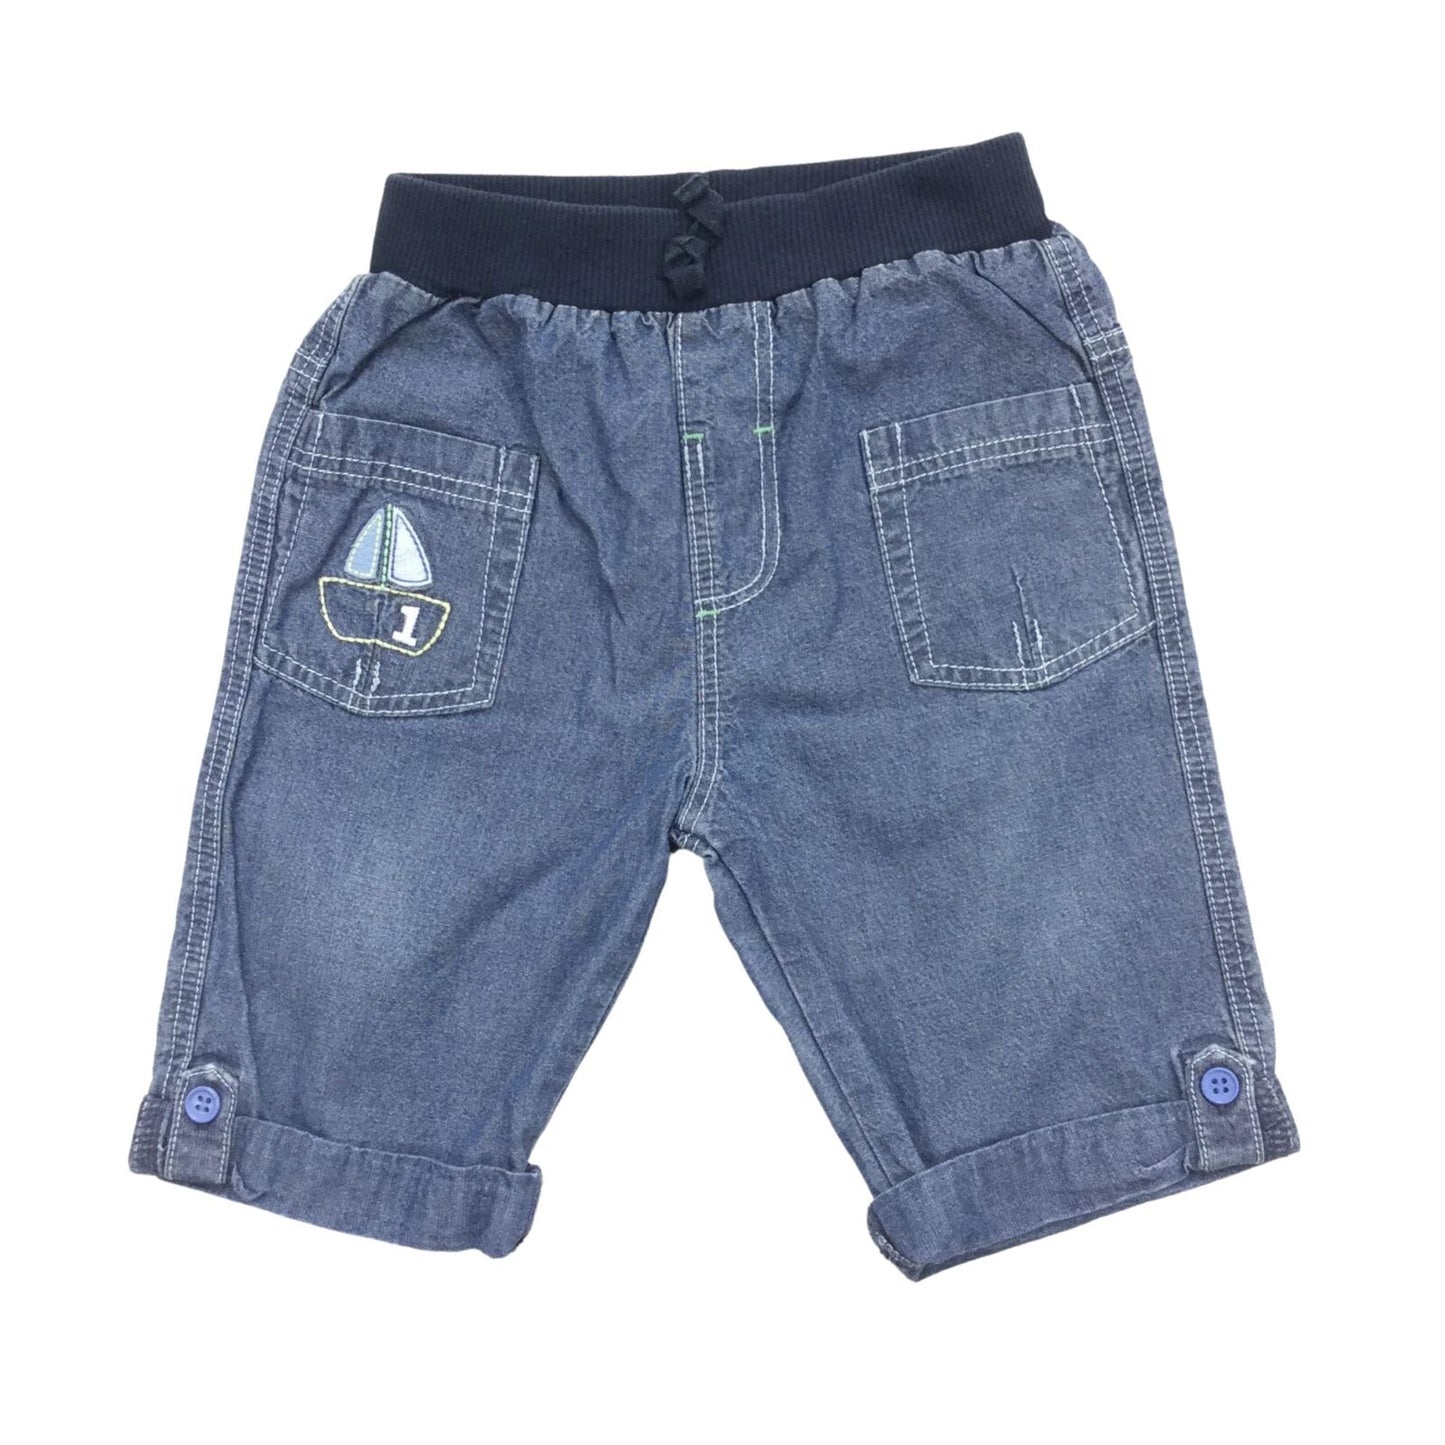 Cotton Denim Style Trousers with Embroidered boat Motif on the Pocket